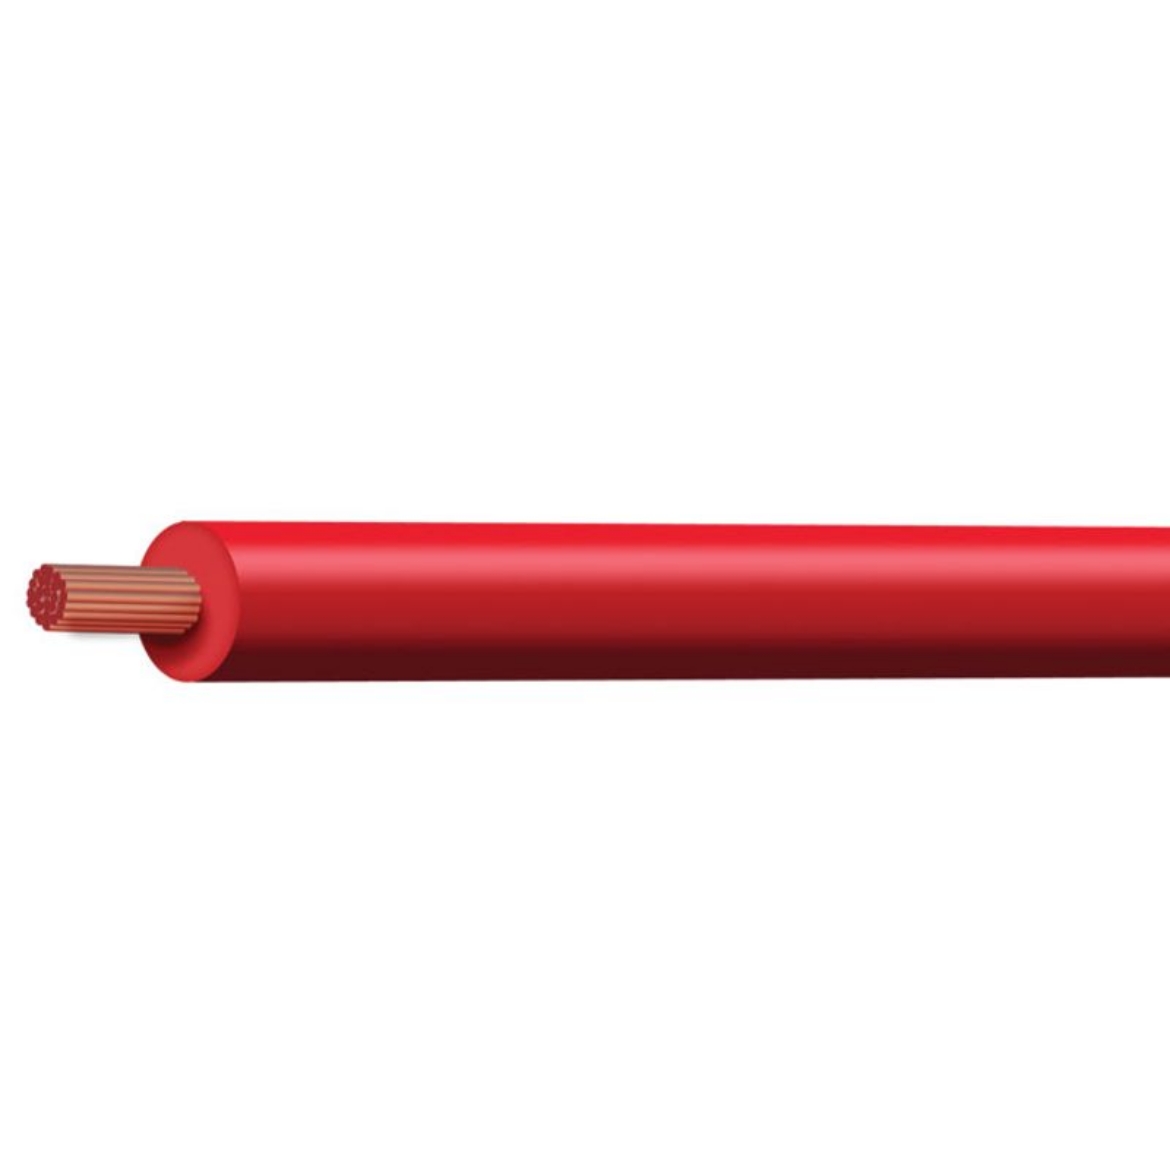 Picture of TYCAB 6MM SINGLE CORE CABLE 50A RED - 30M ROLL